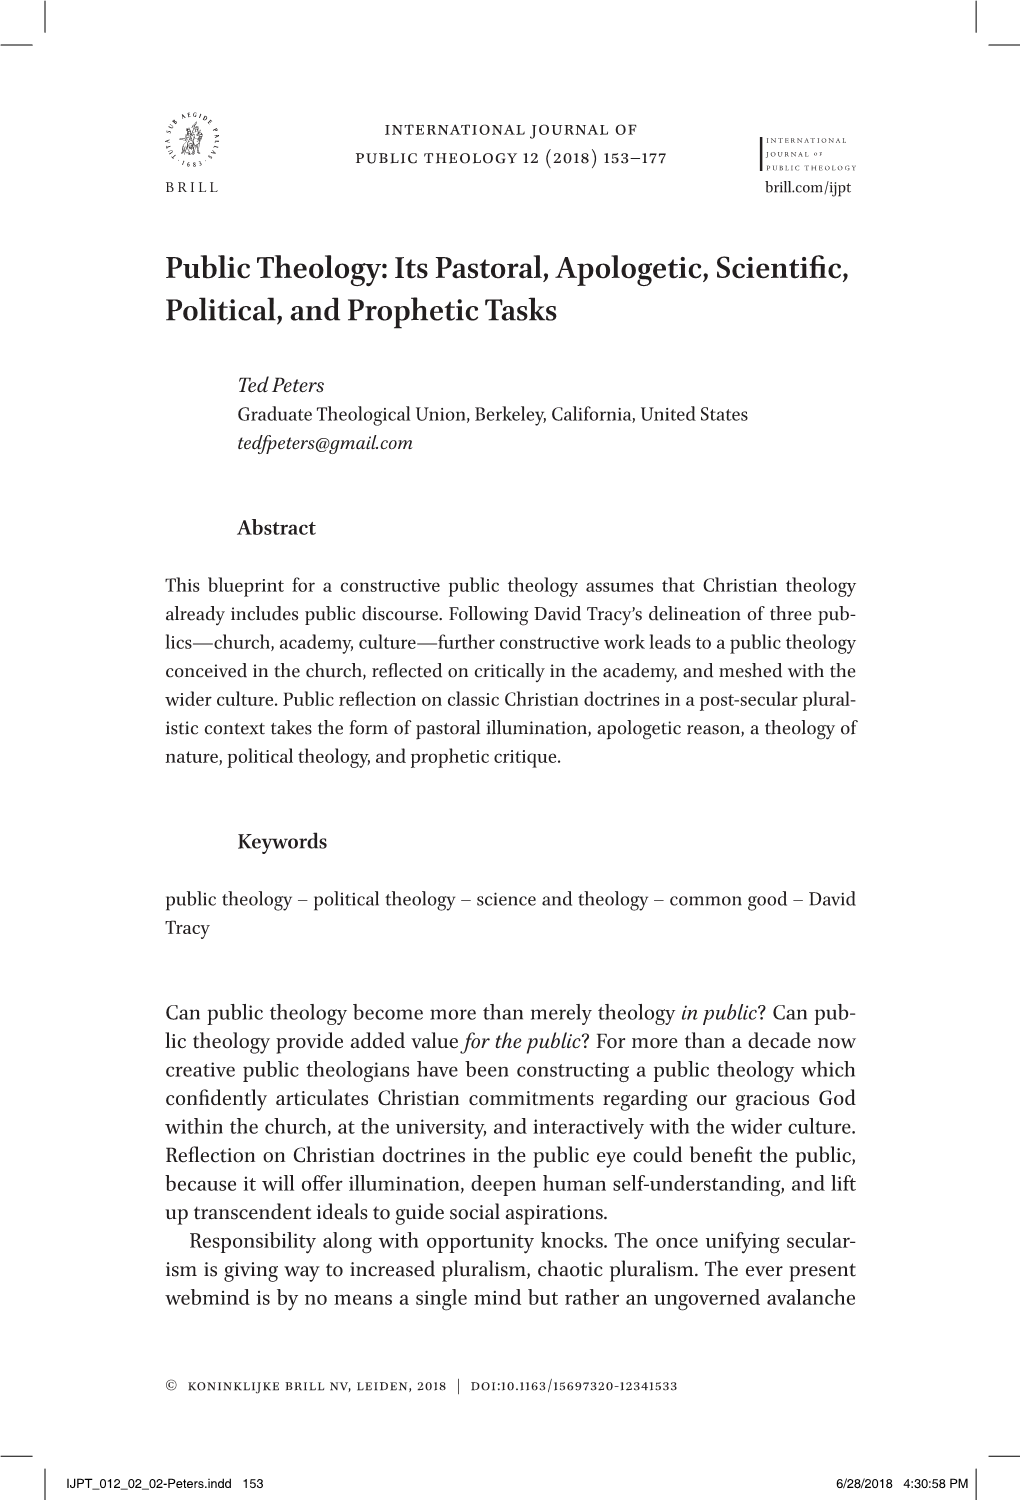 Public Theology: Its Pastoral, Apologetic, Scientific, Political, and Prophetic Tasks